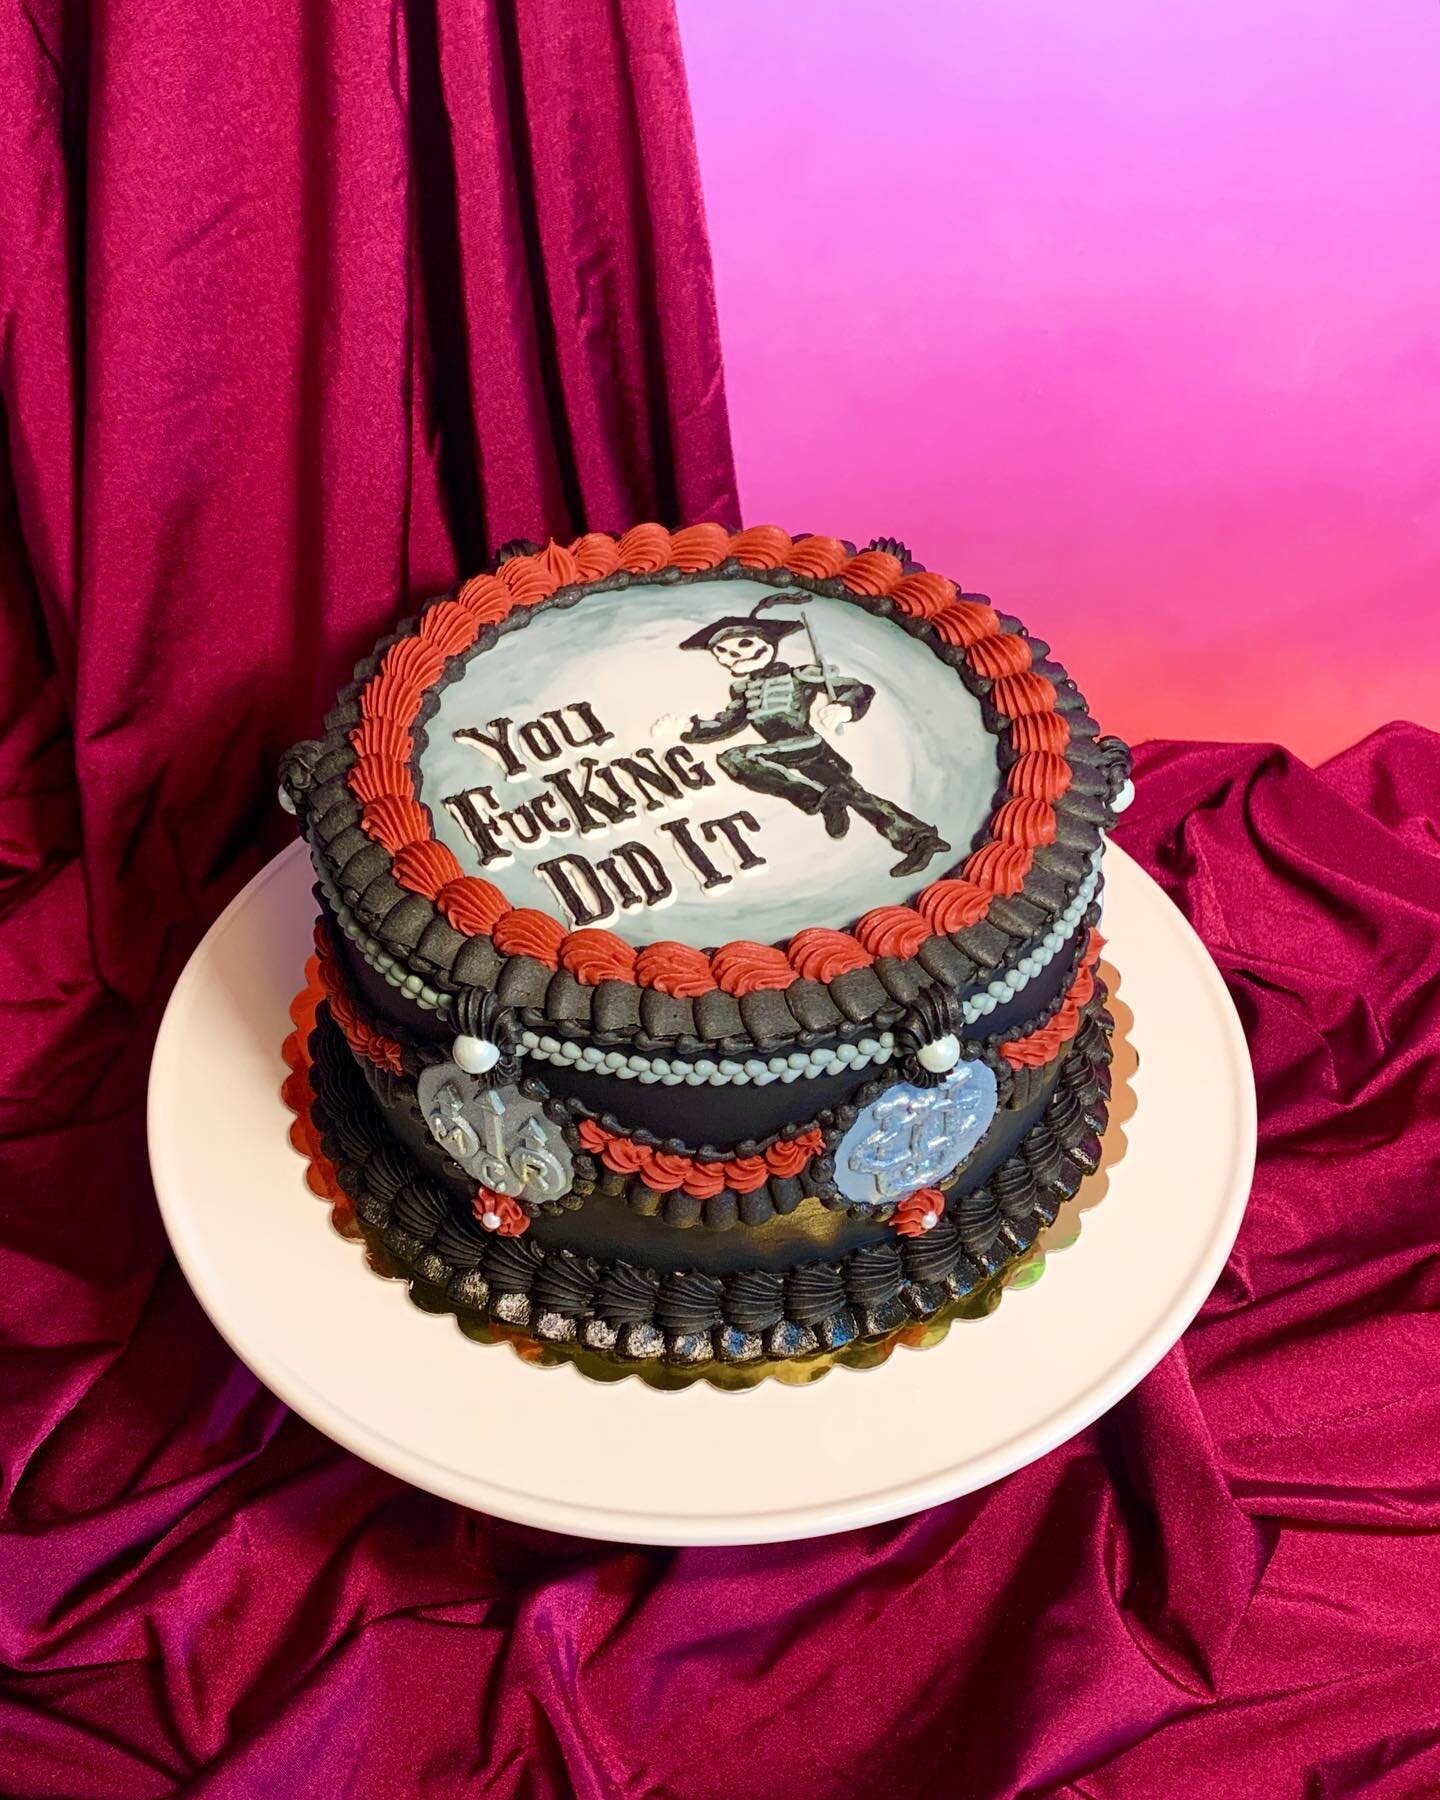 My Chemical Romance-themed graduation cake 💀🎓🖤
Commissioned by one of the worlds greatest moms @missmartini666 for her daughter Elizabeth 🎂chocolate cake with chocolate buttercream filling, buttercream and fondant decoration 

Thank you Michelle 